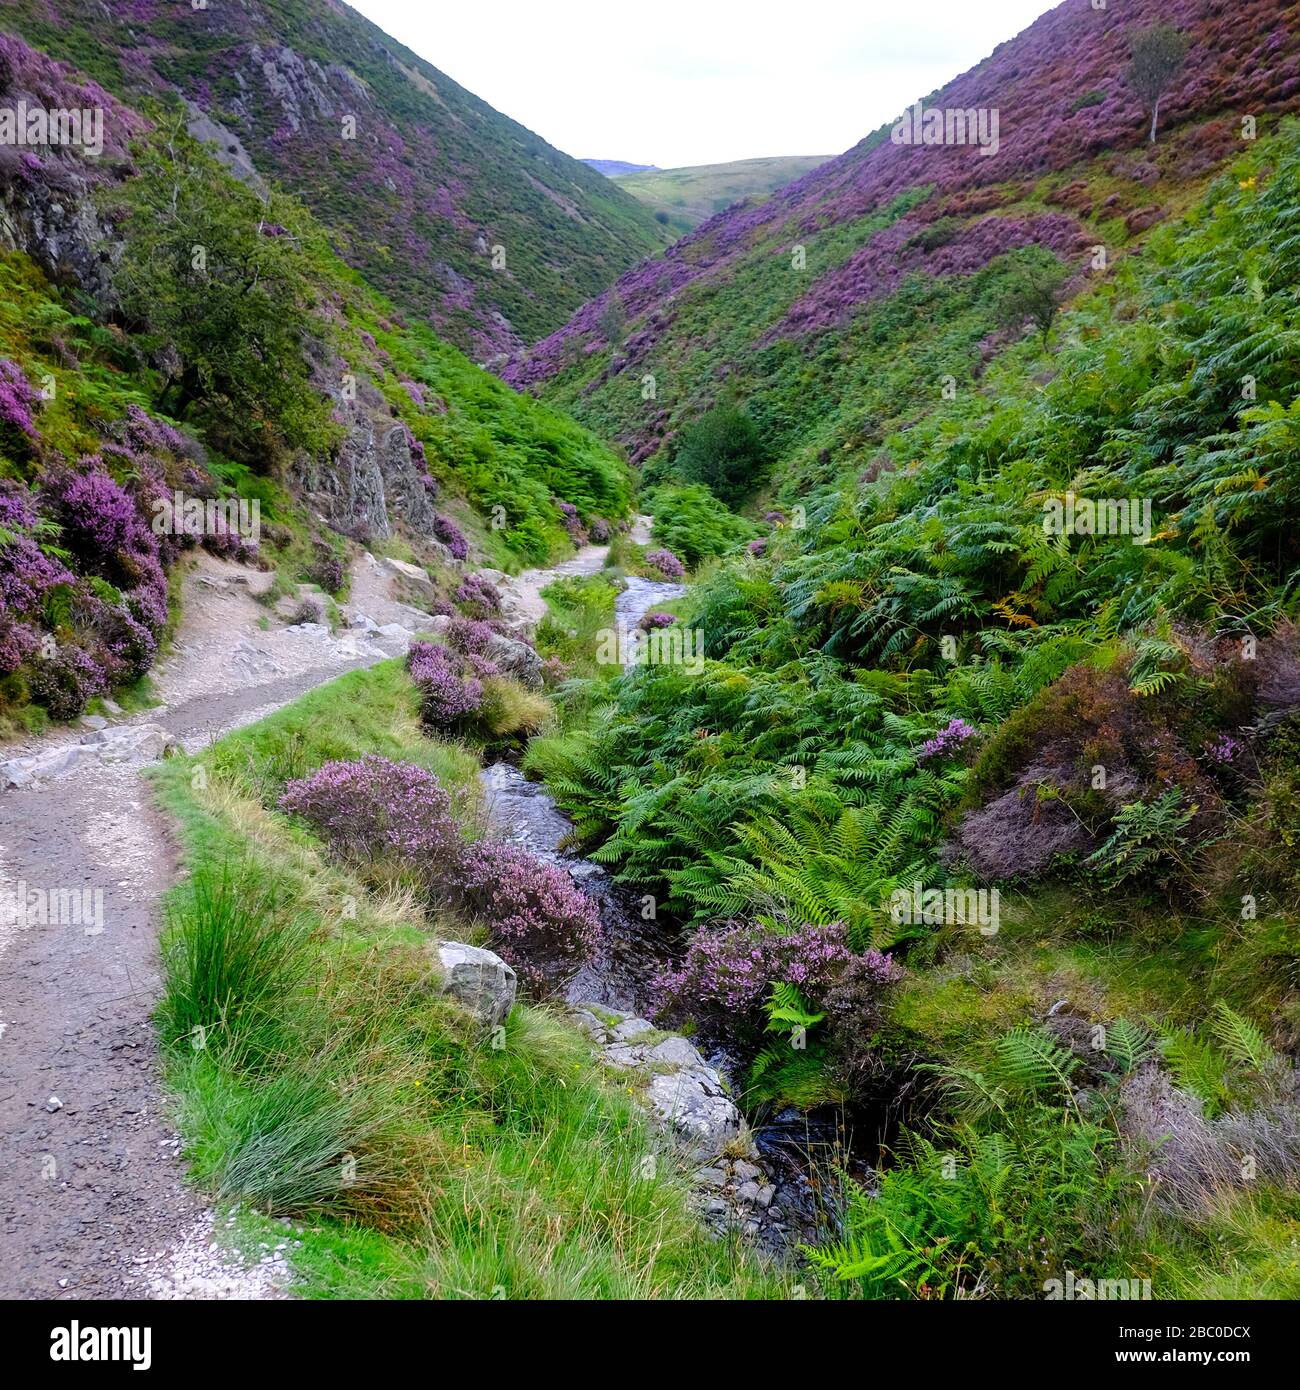 Carding Mill Valley on the outskirts of the Long Mynd range and the town of Church Stretton in the Shropshire Hills Area of Outstanding Natural Beauty. Stock Photo